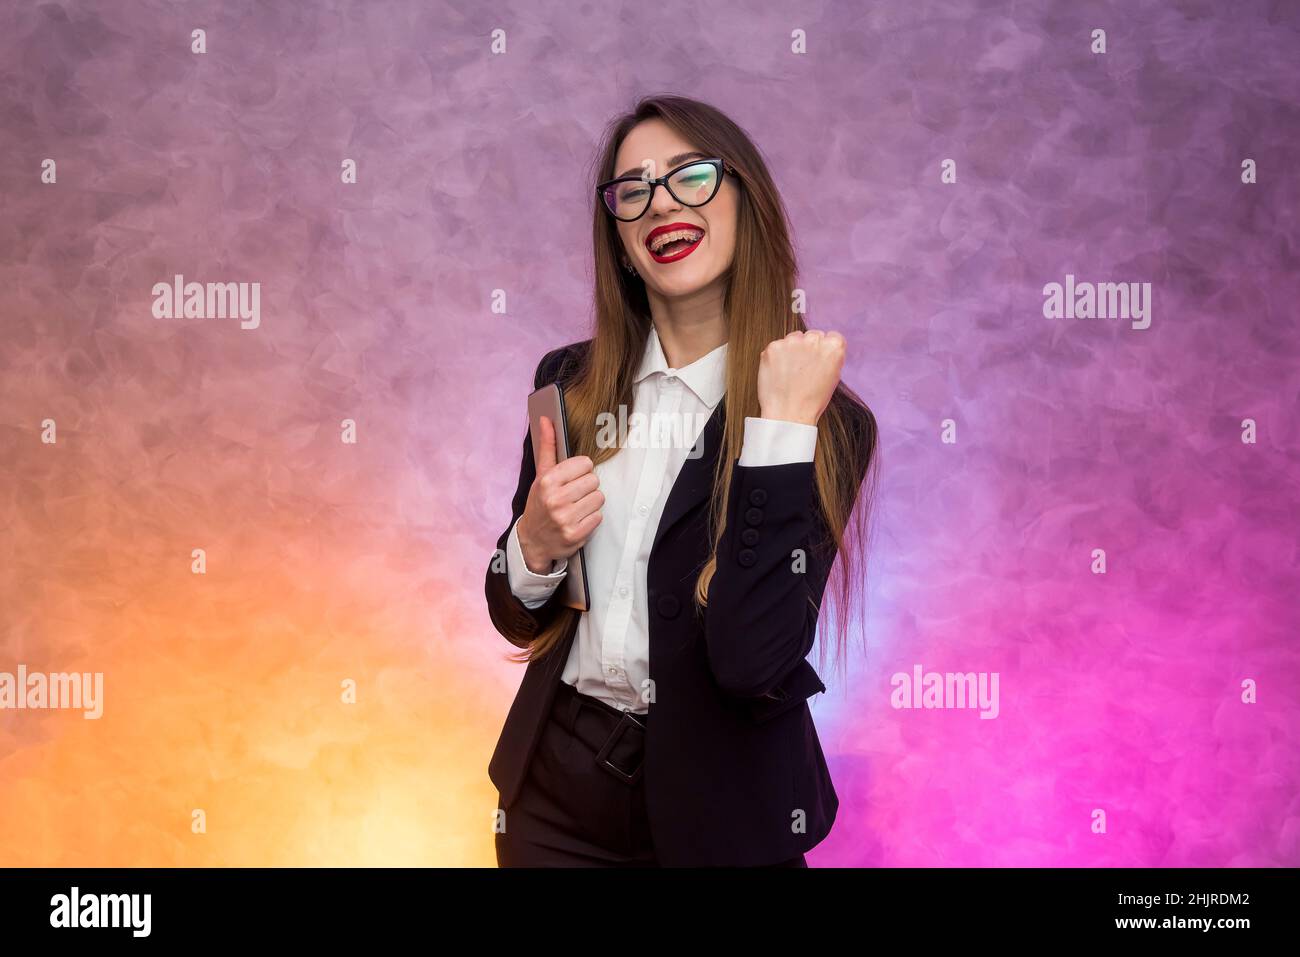 Business concept. Stylish businesswoman in elegant suit posing on abstract background Stock Photo